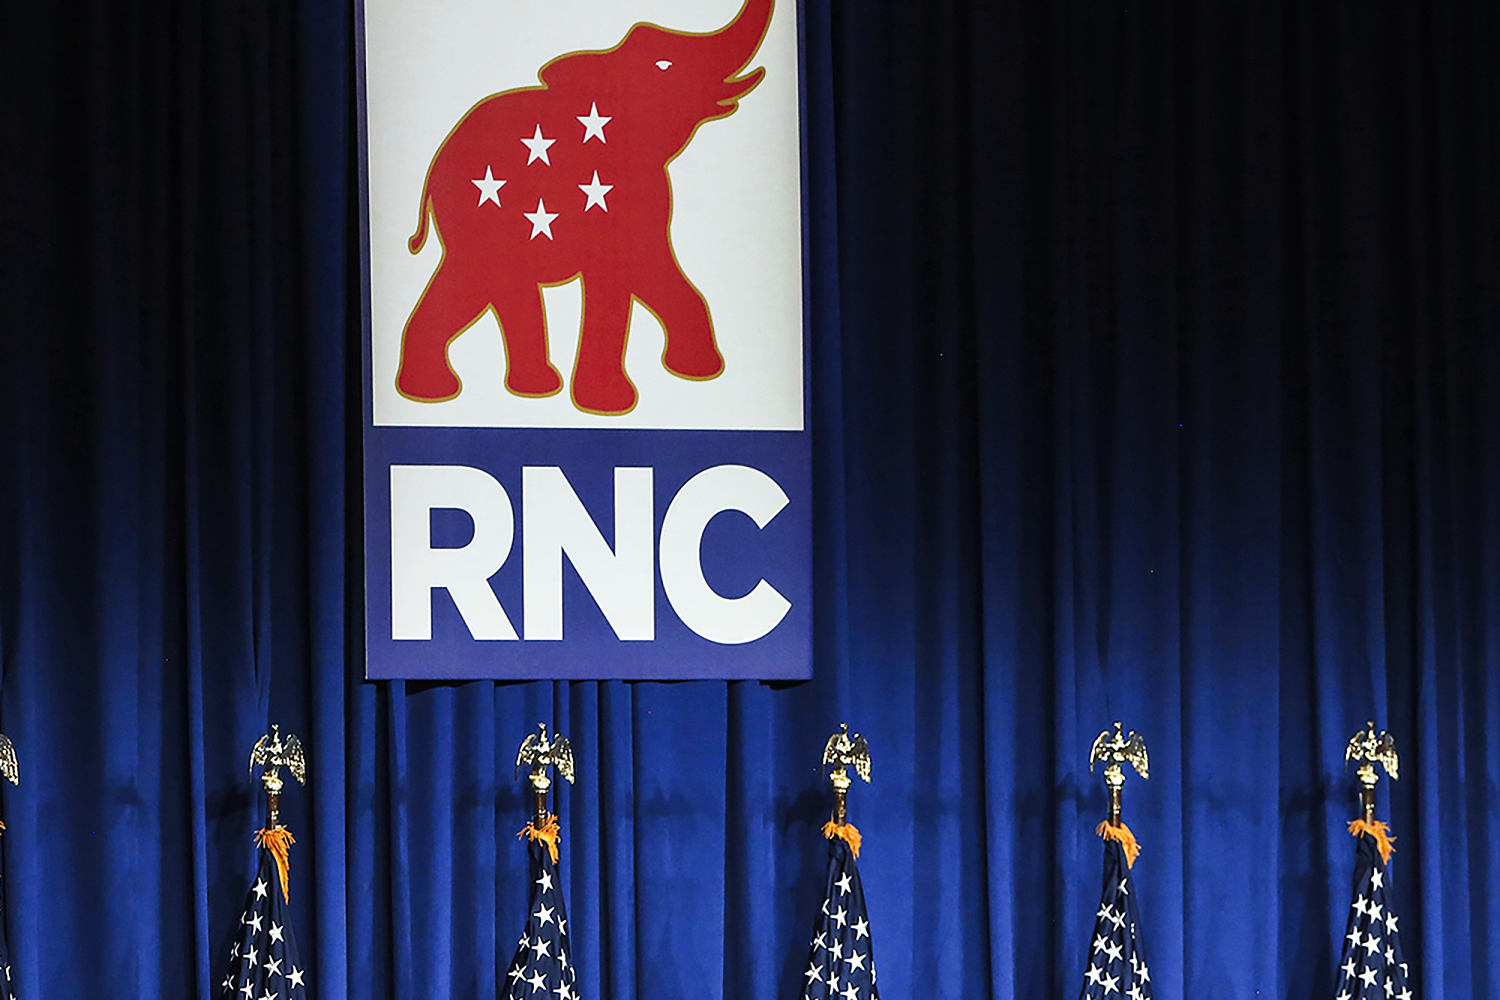 To address the 2020 nightmare, the RNC tries a new strategy